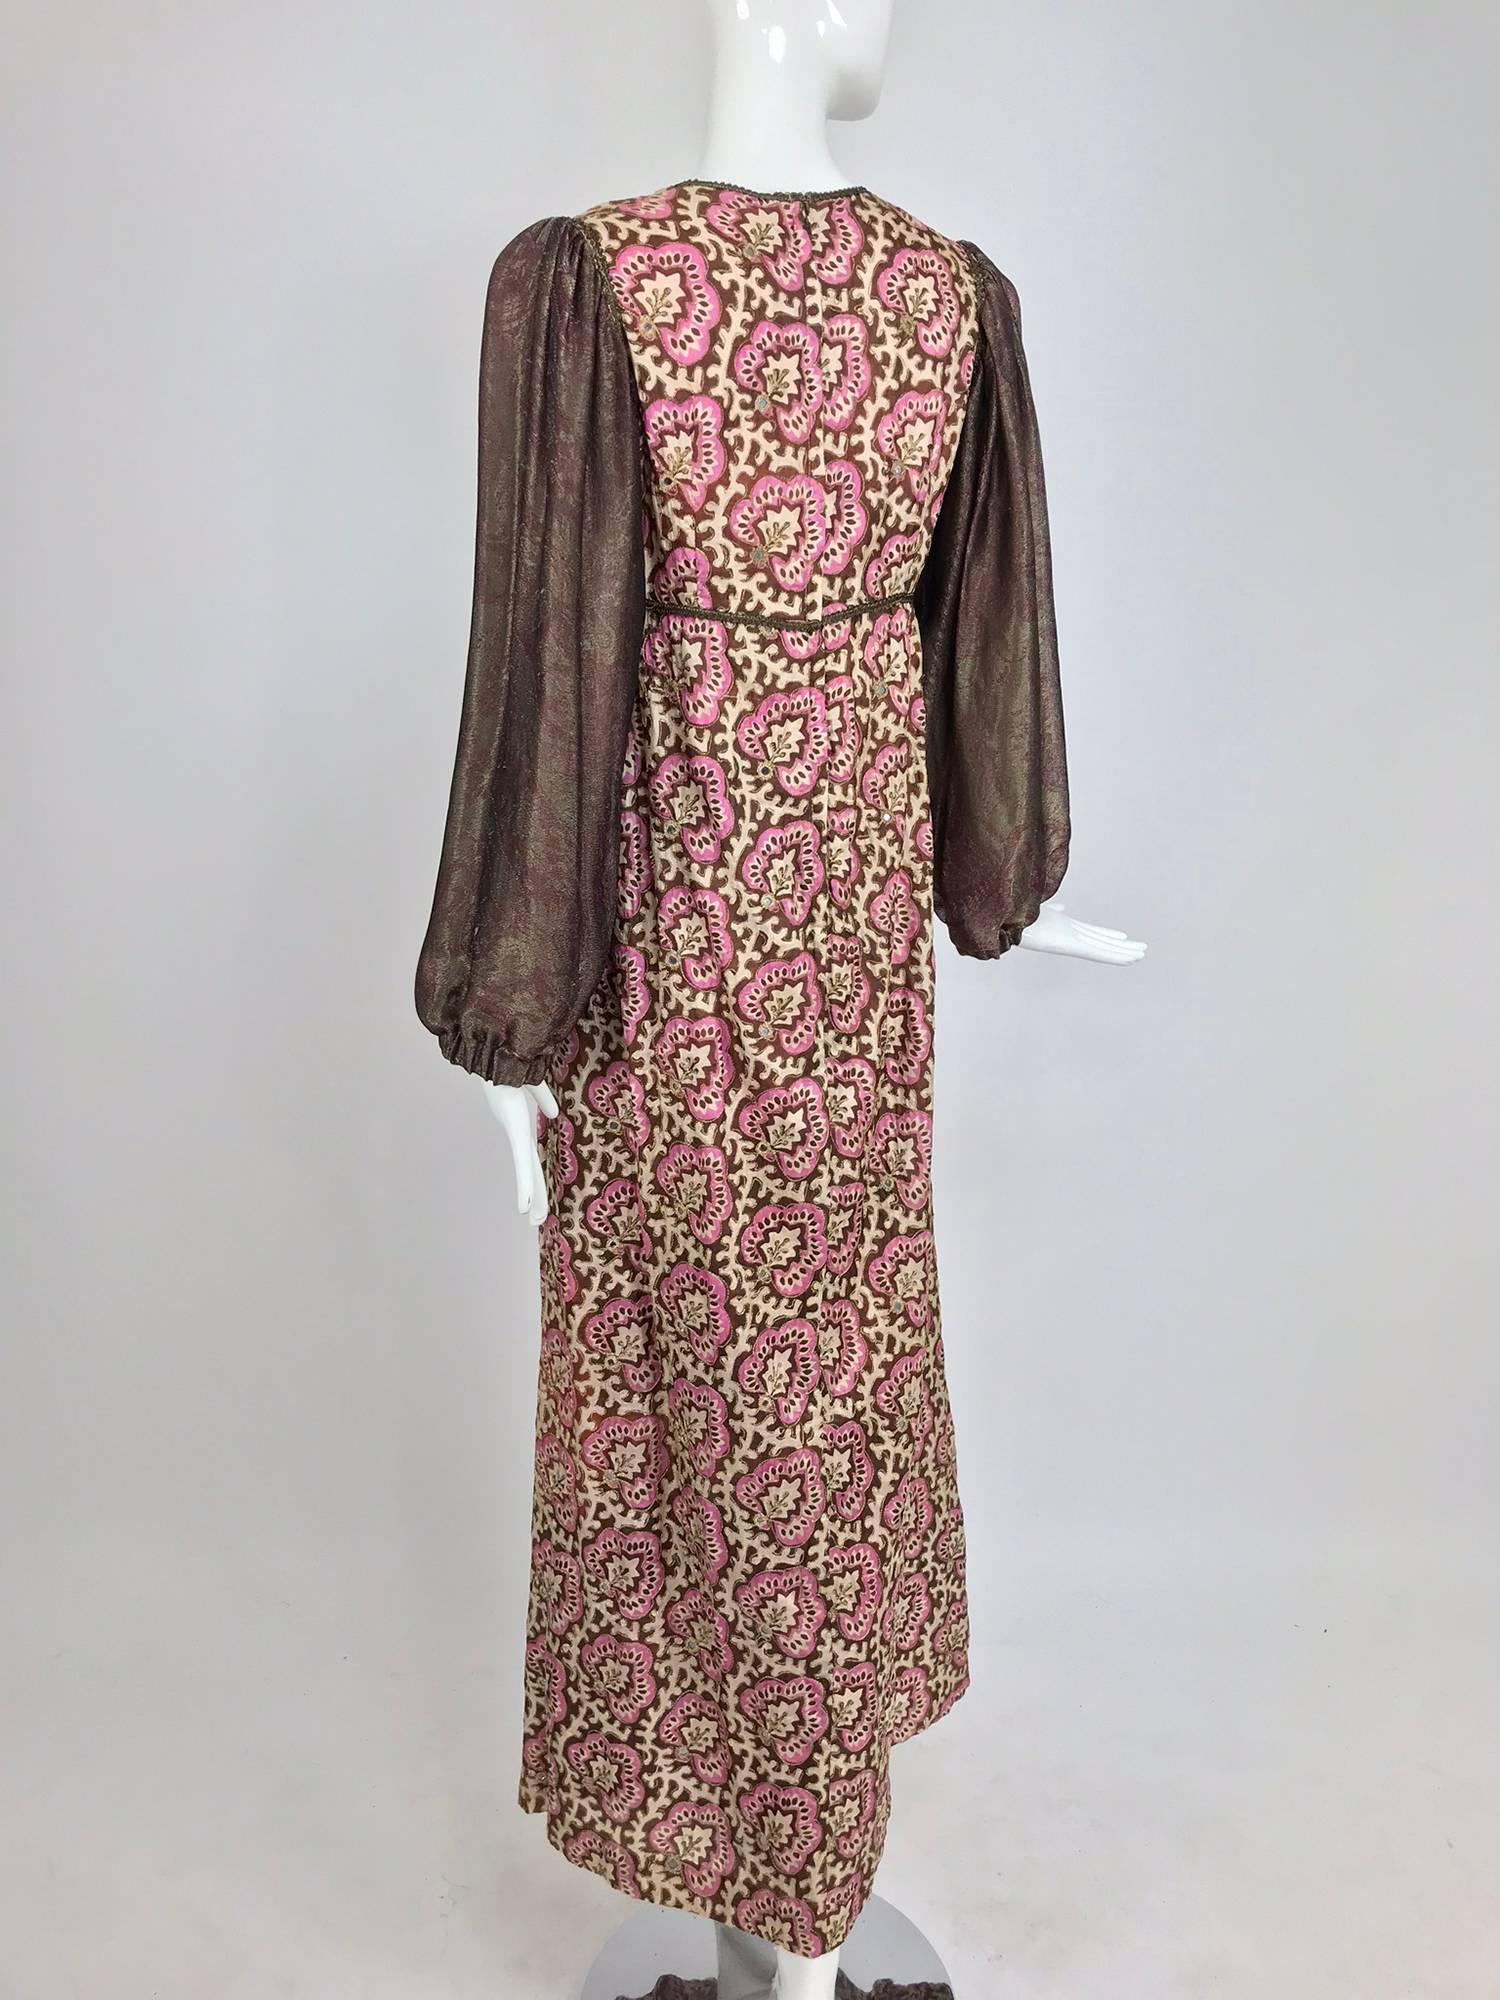 Thea Porter printed mirrored silk maxi dress with gold shot sleeves 1970s 2